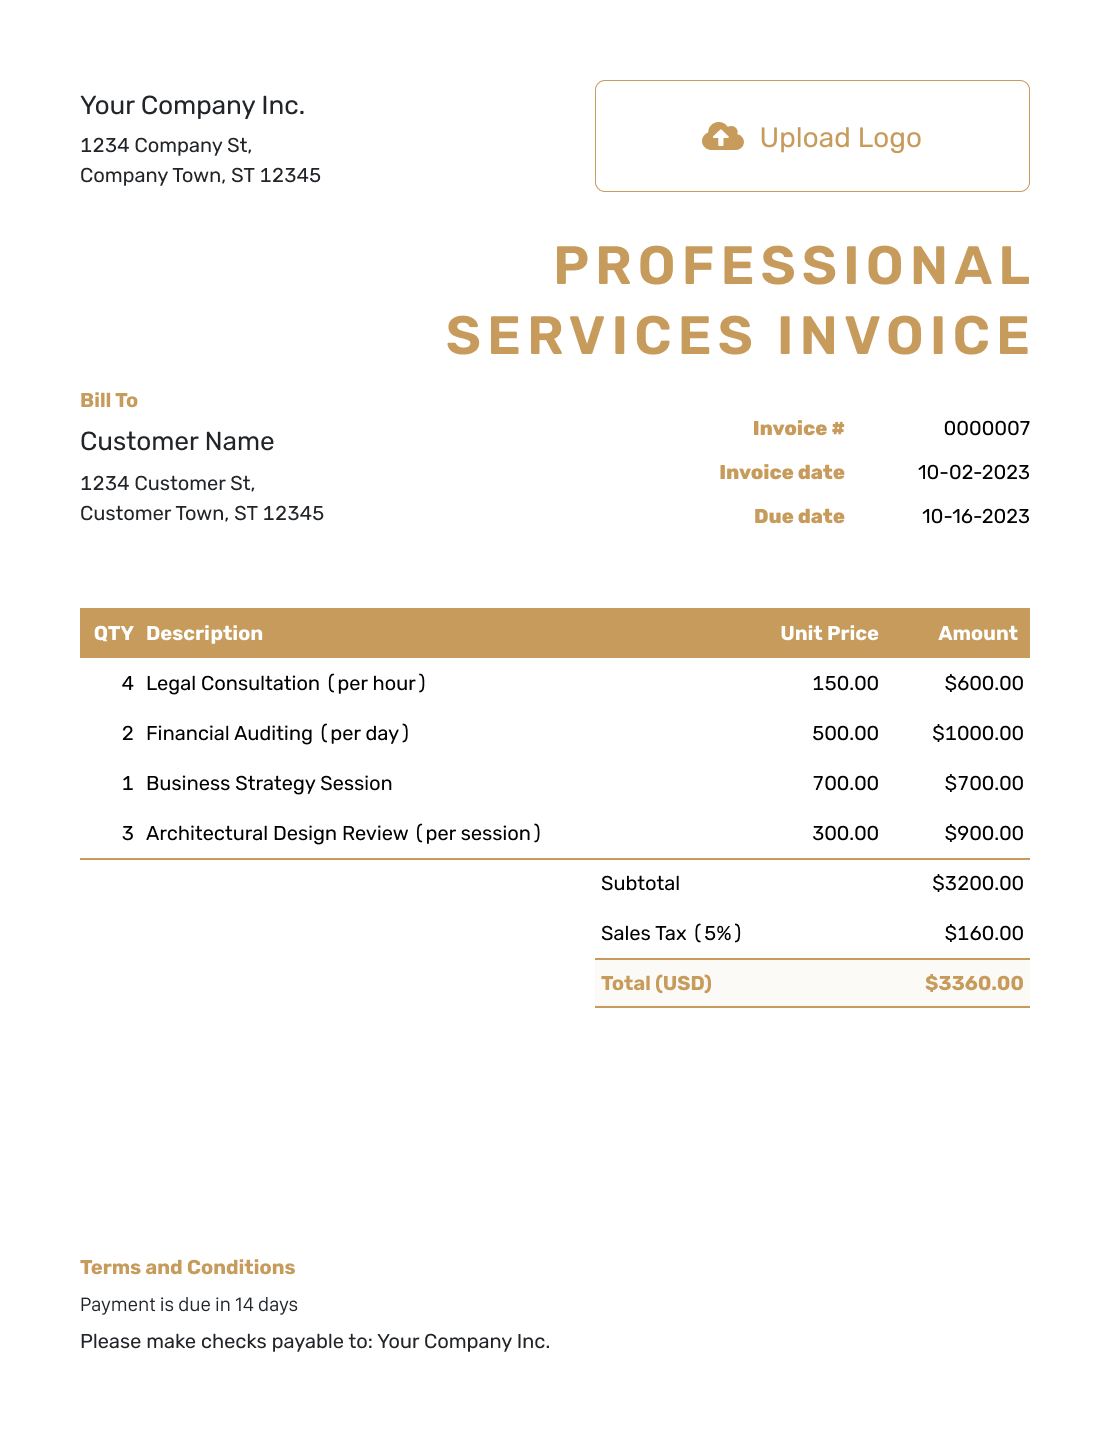 Basic Professional Services Invoice Template